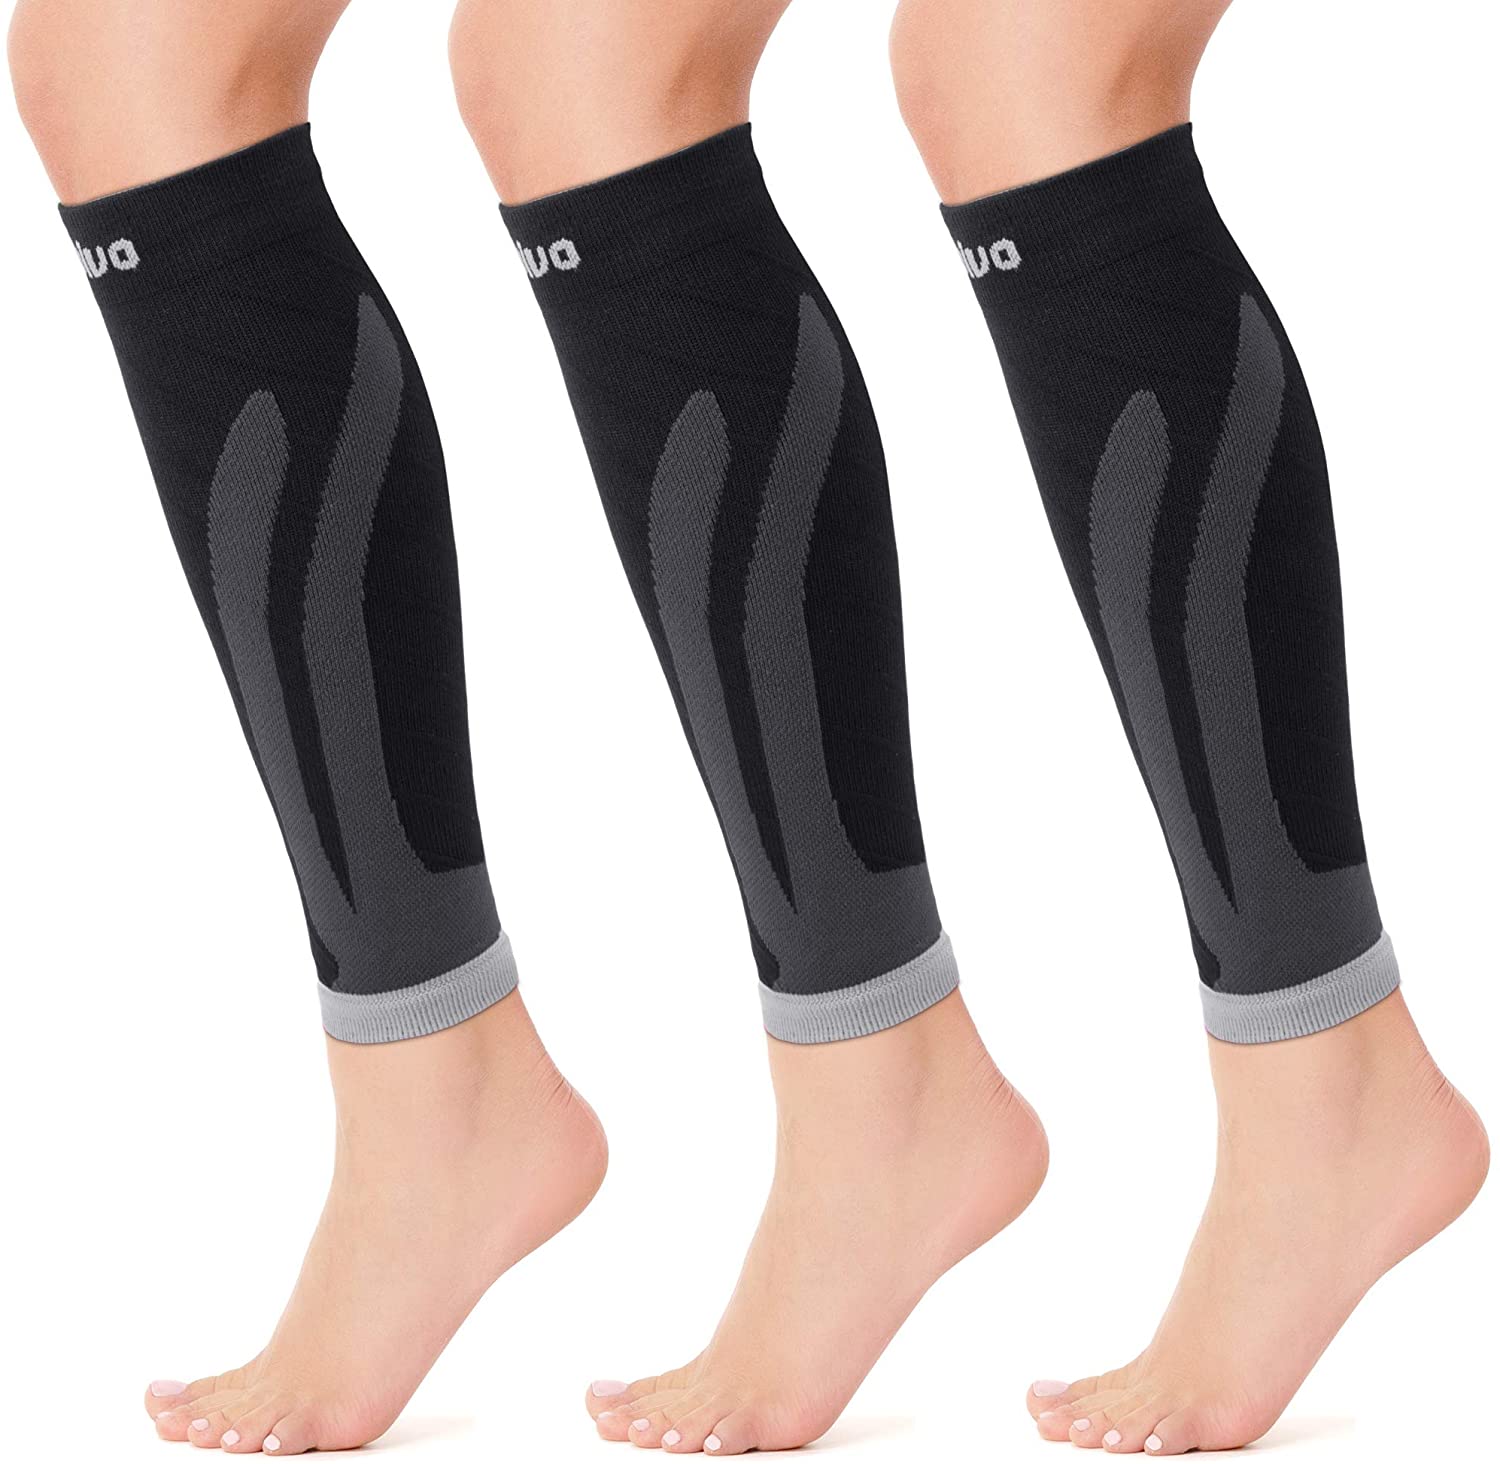 CAMBIVO 3 Pairs Calf Compression Sleeve for Men and Women, Leg Sleeve for Shin  Splint, Varicose Vein, Running, Working Out, Nurse 